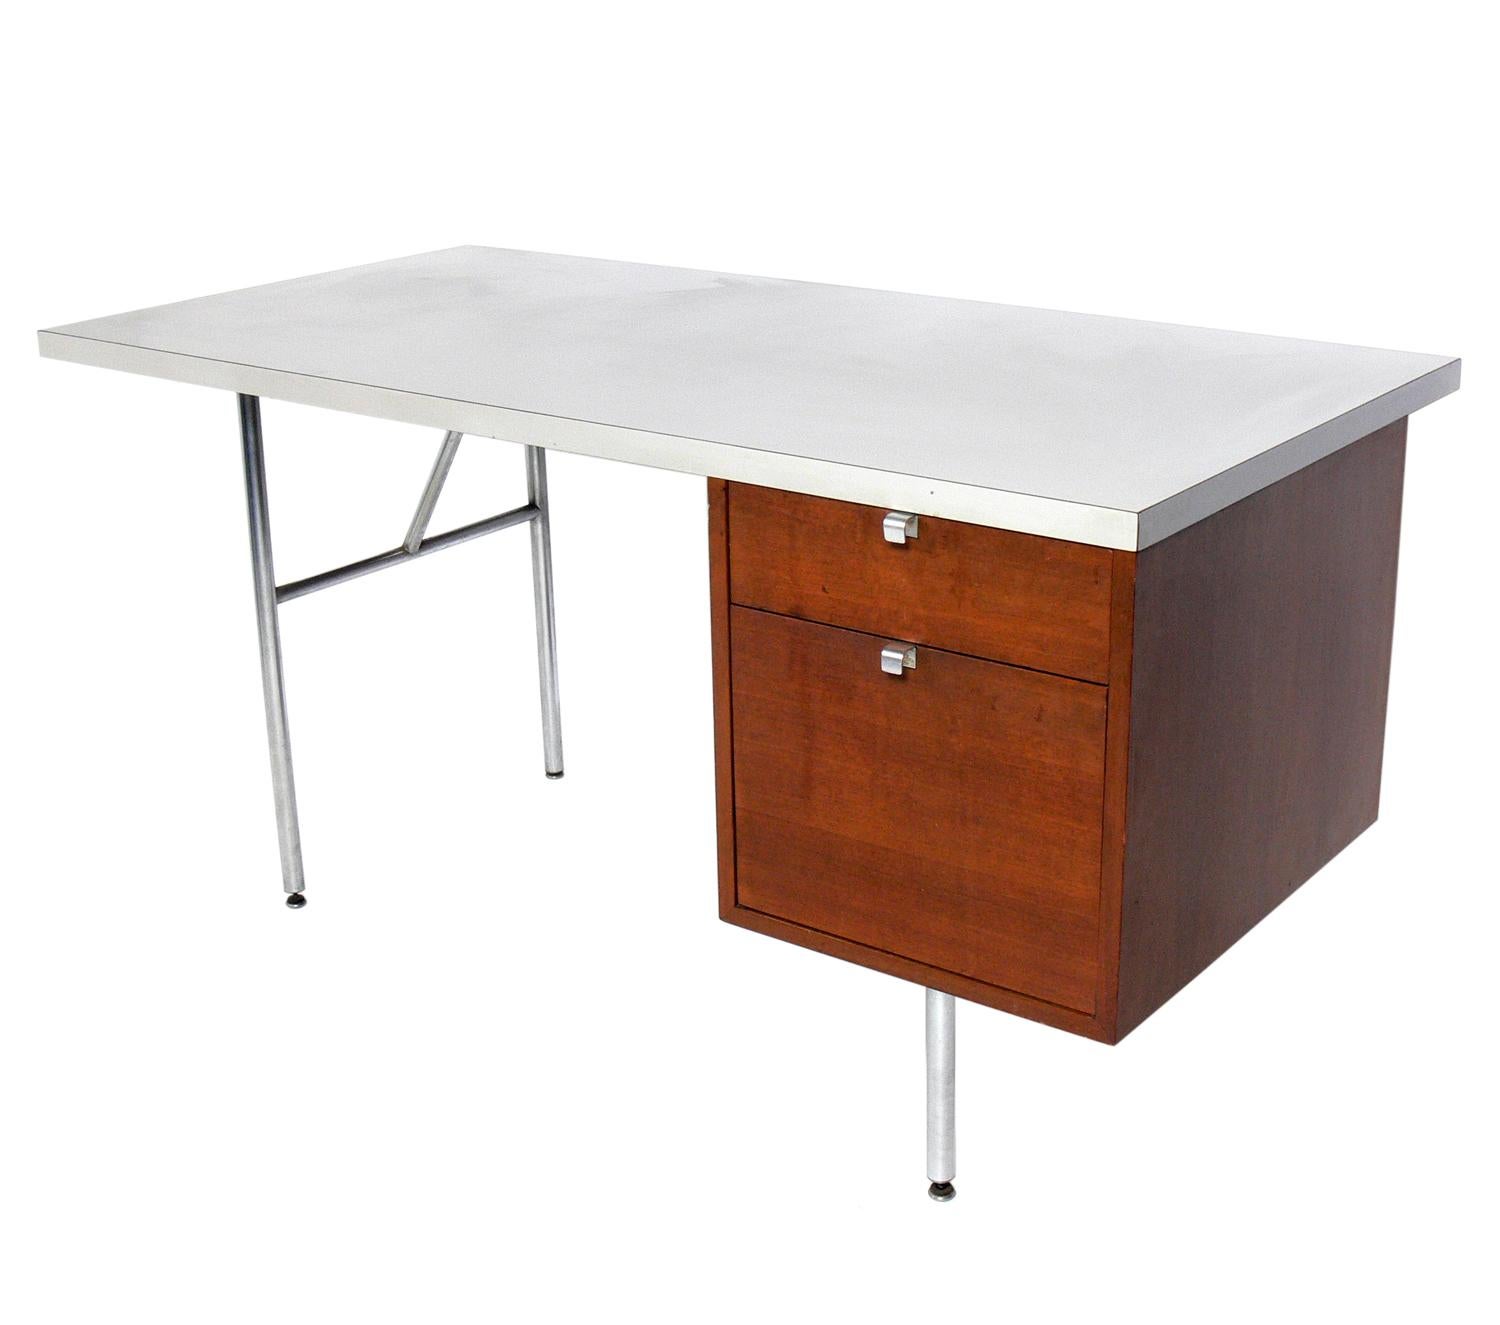 Clean lined modern desk, designed by George Nelson for Herman Miller, American, circa 1950s.